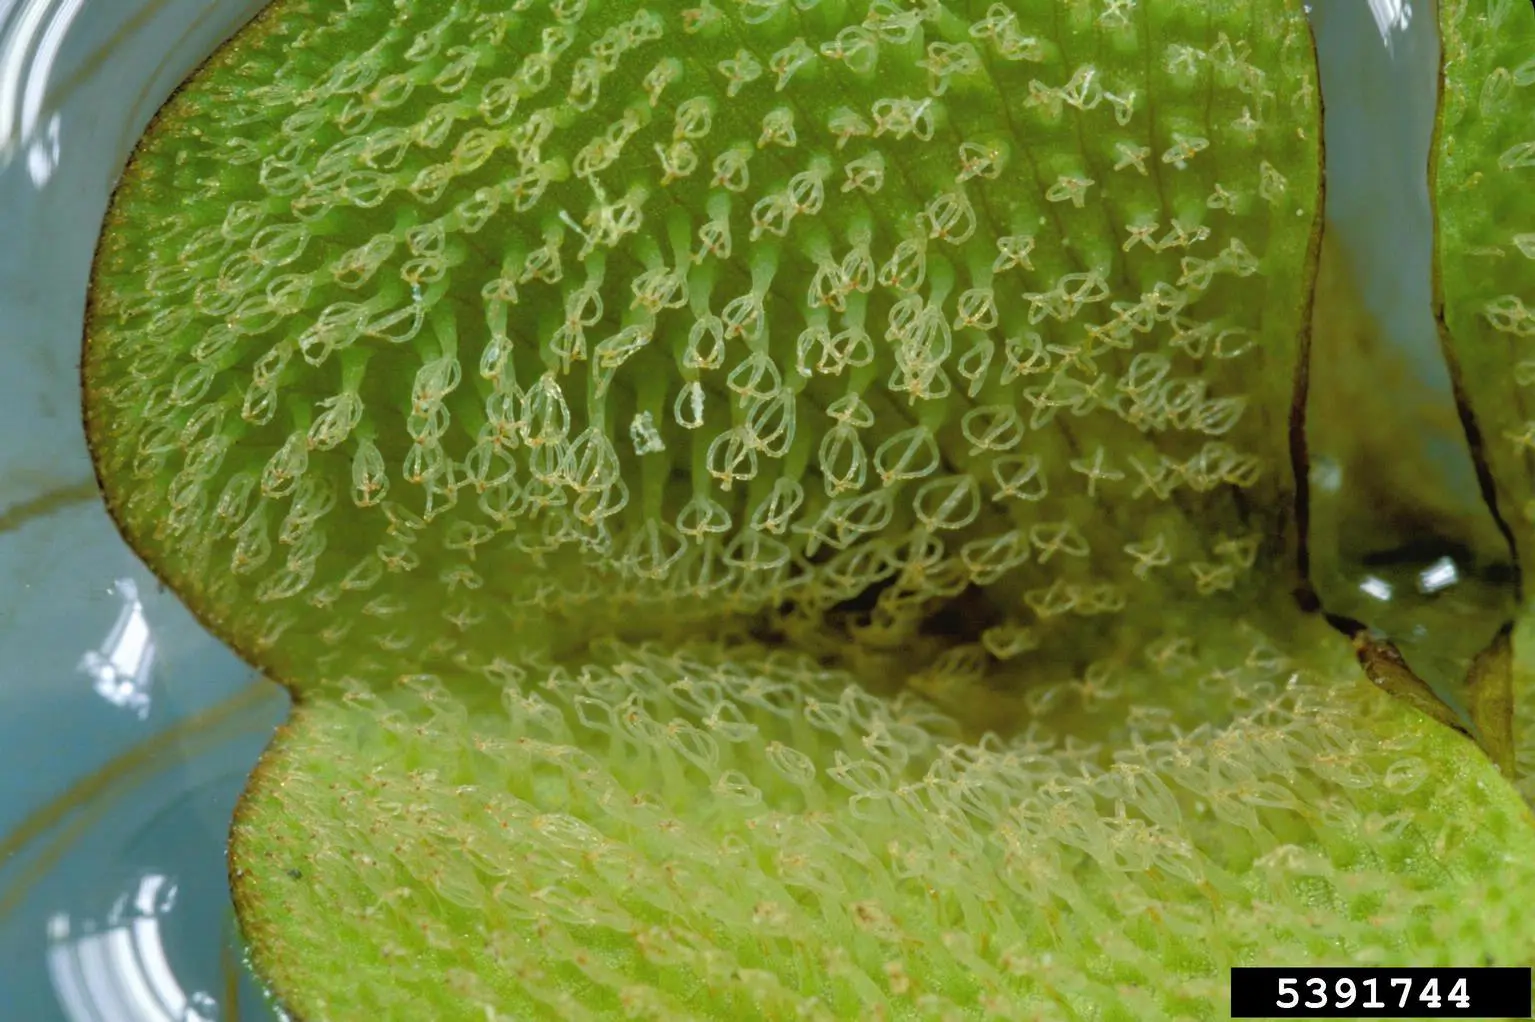 A close up of the top part of an anemone.